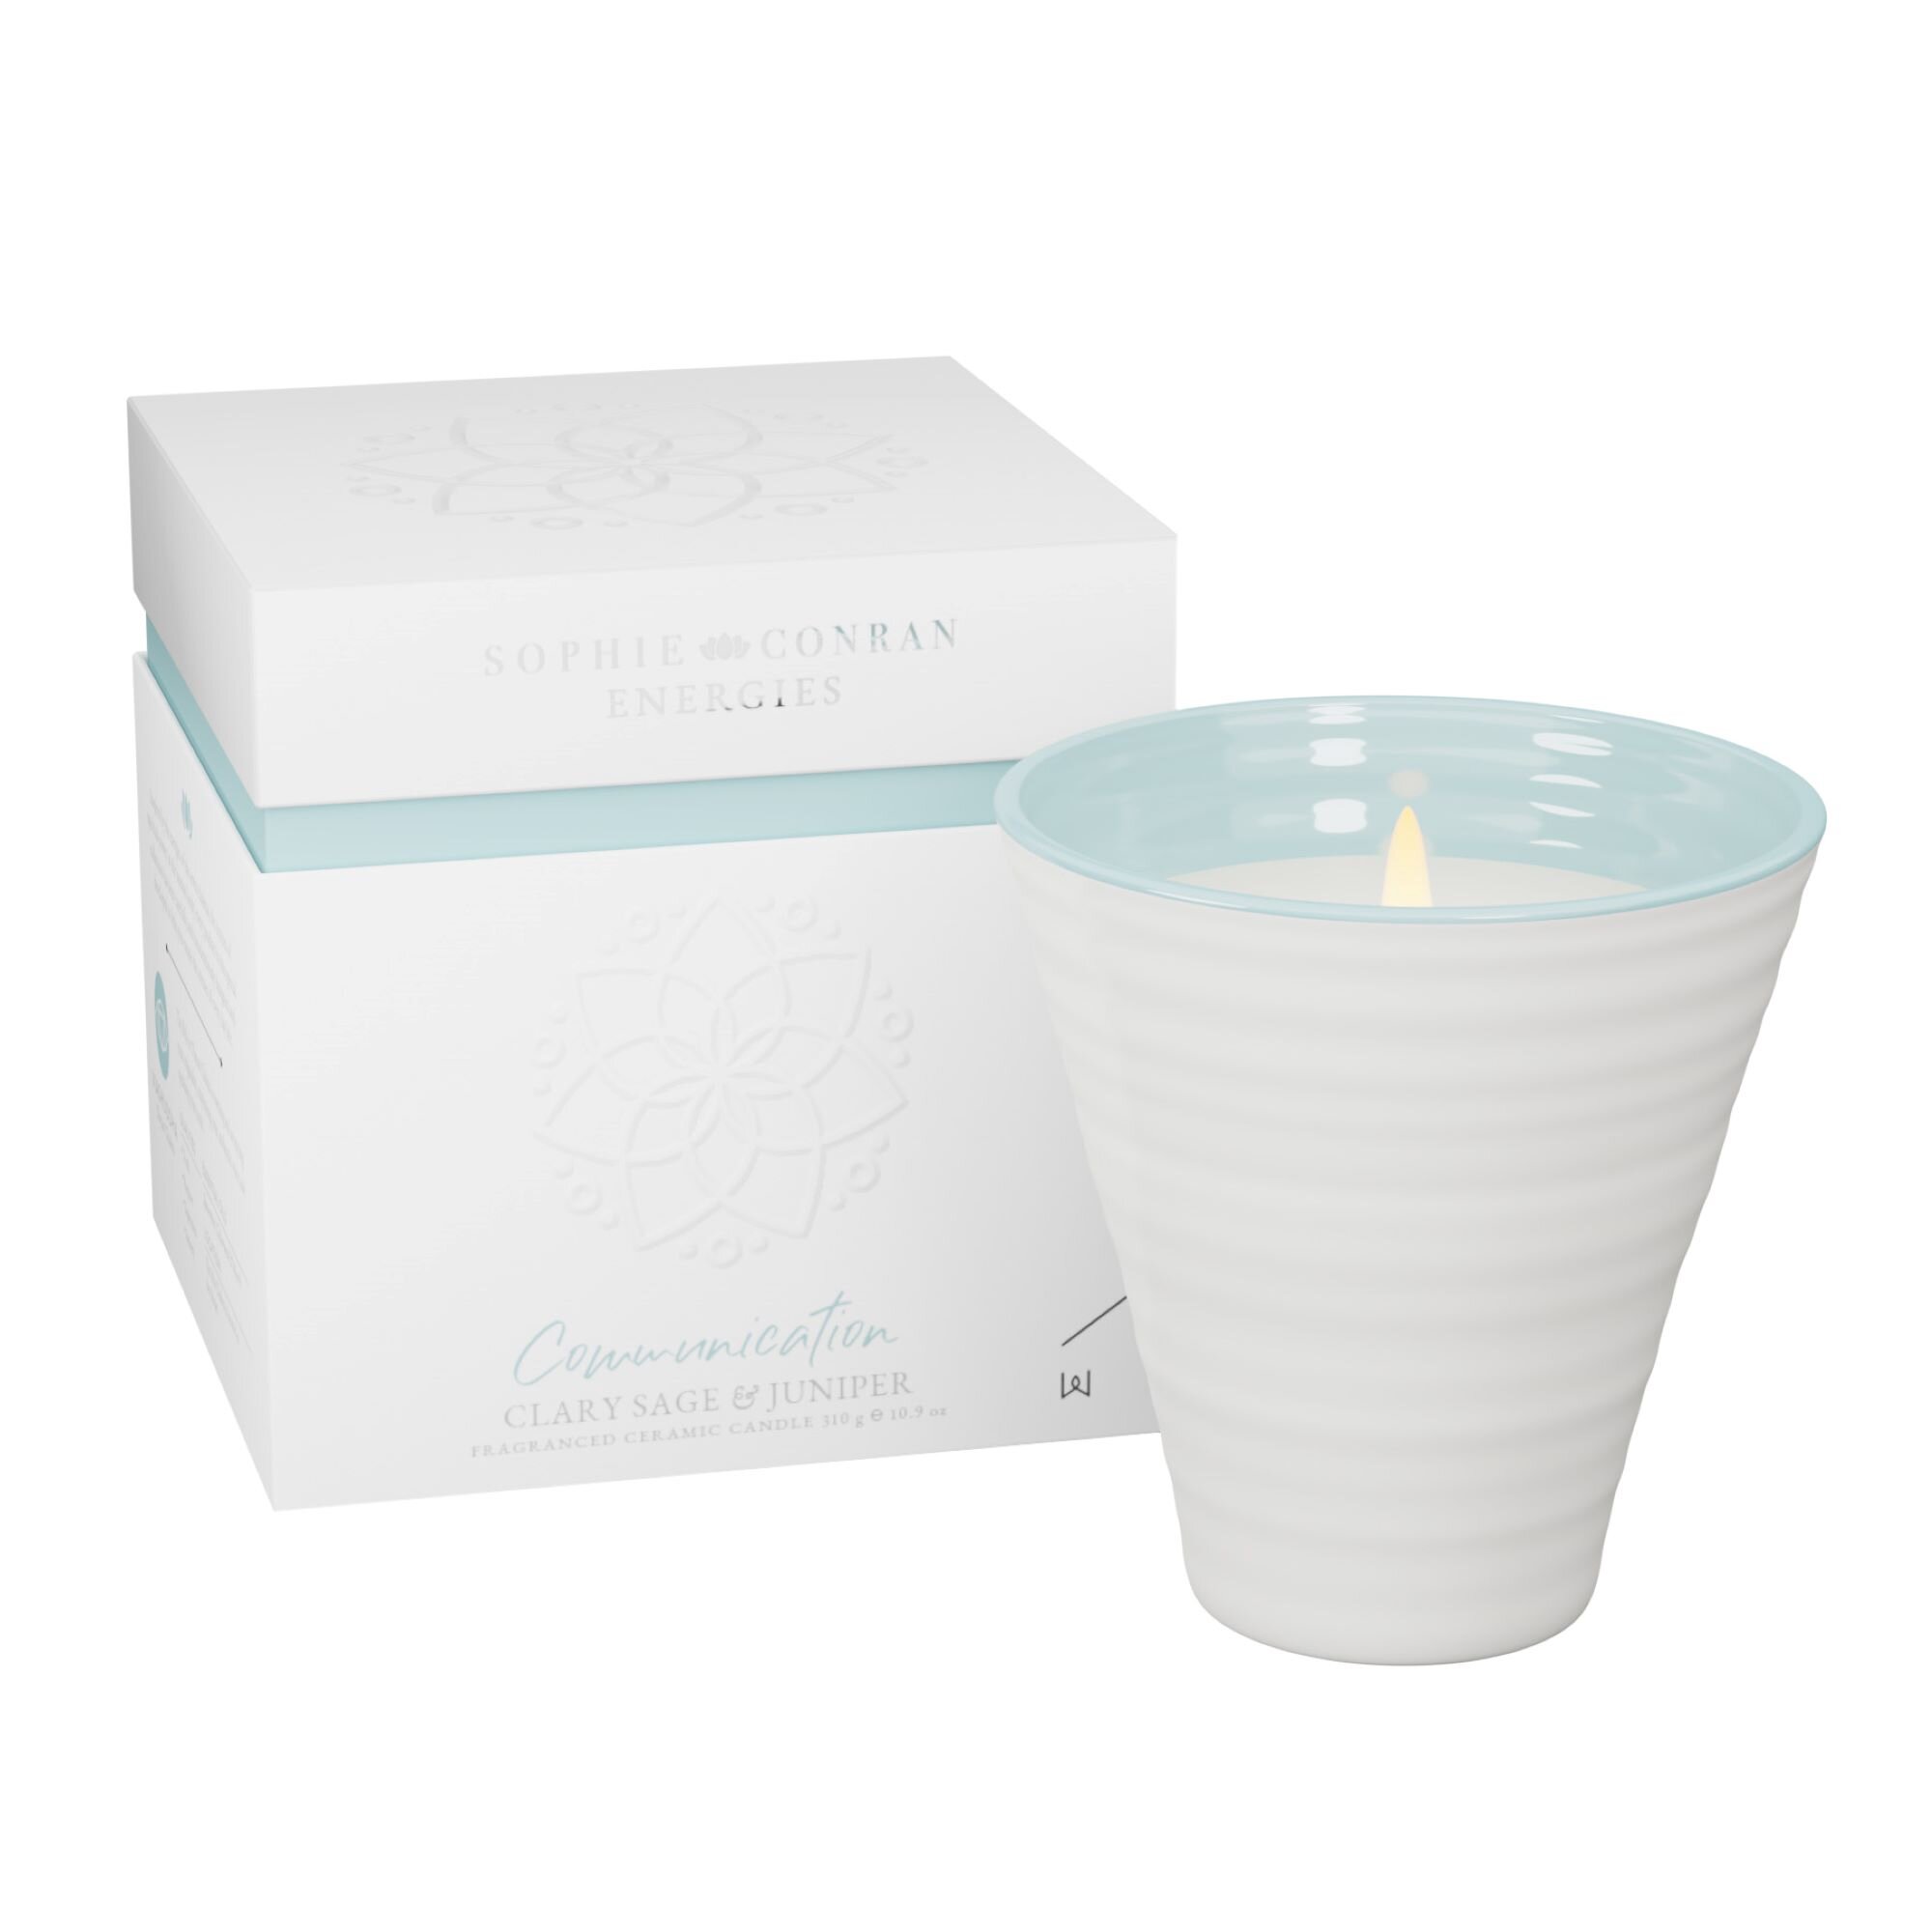 Clarity candle— mint green cup